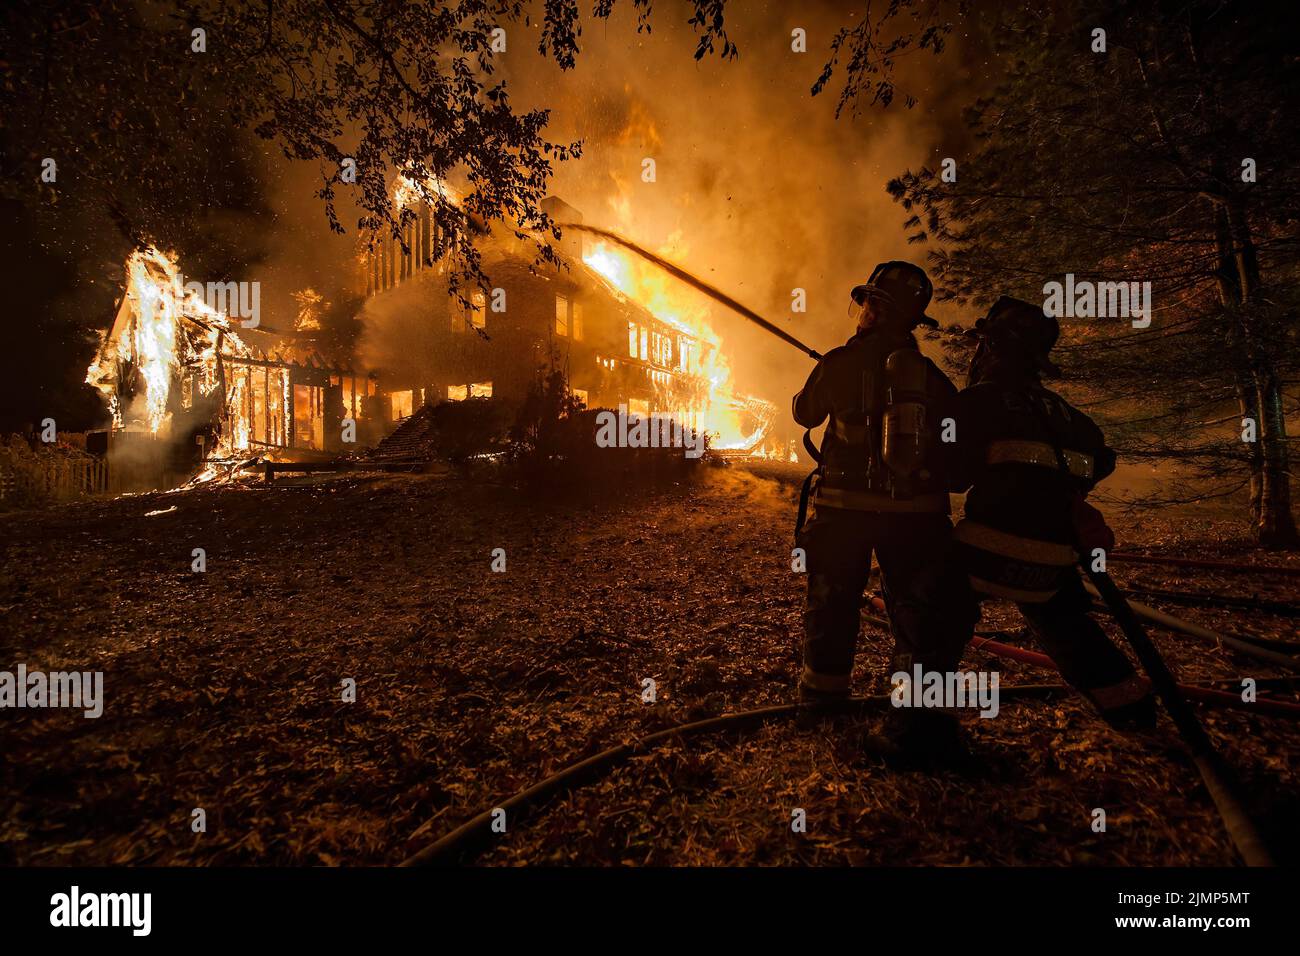 A two-man hose team uses a hose to spray water onto the fully engulfed home as at 0404 Hrs. on Thursday, November 1st, 2012, the Bridgehampton Fire De Stock Photo